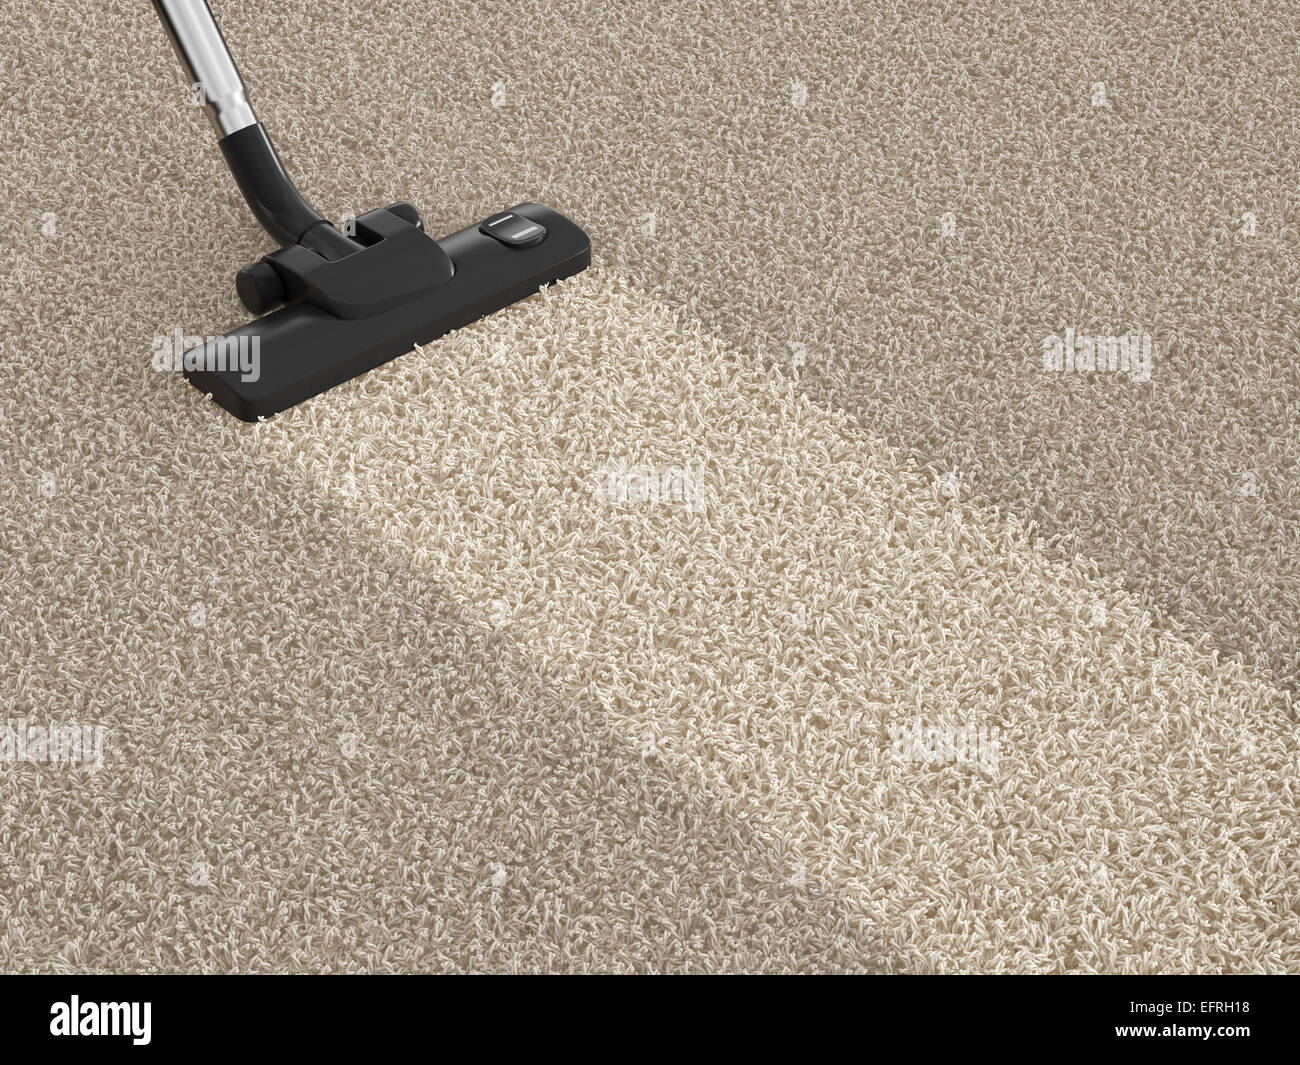 Vacuum cleaner hoover on the dirty carpet. House cleaning concept Stock Photo